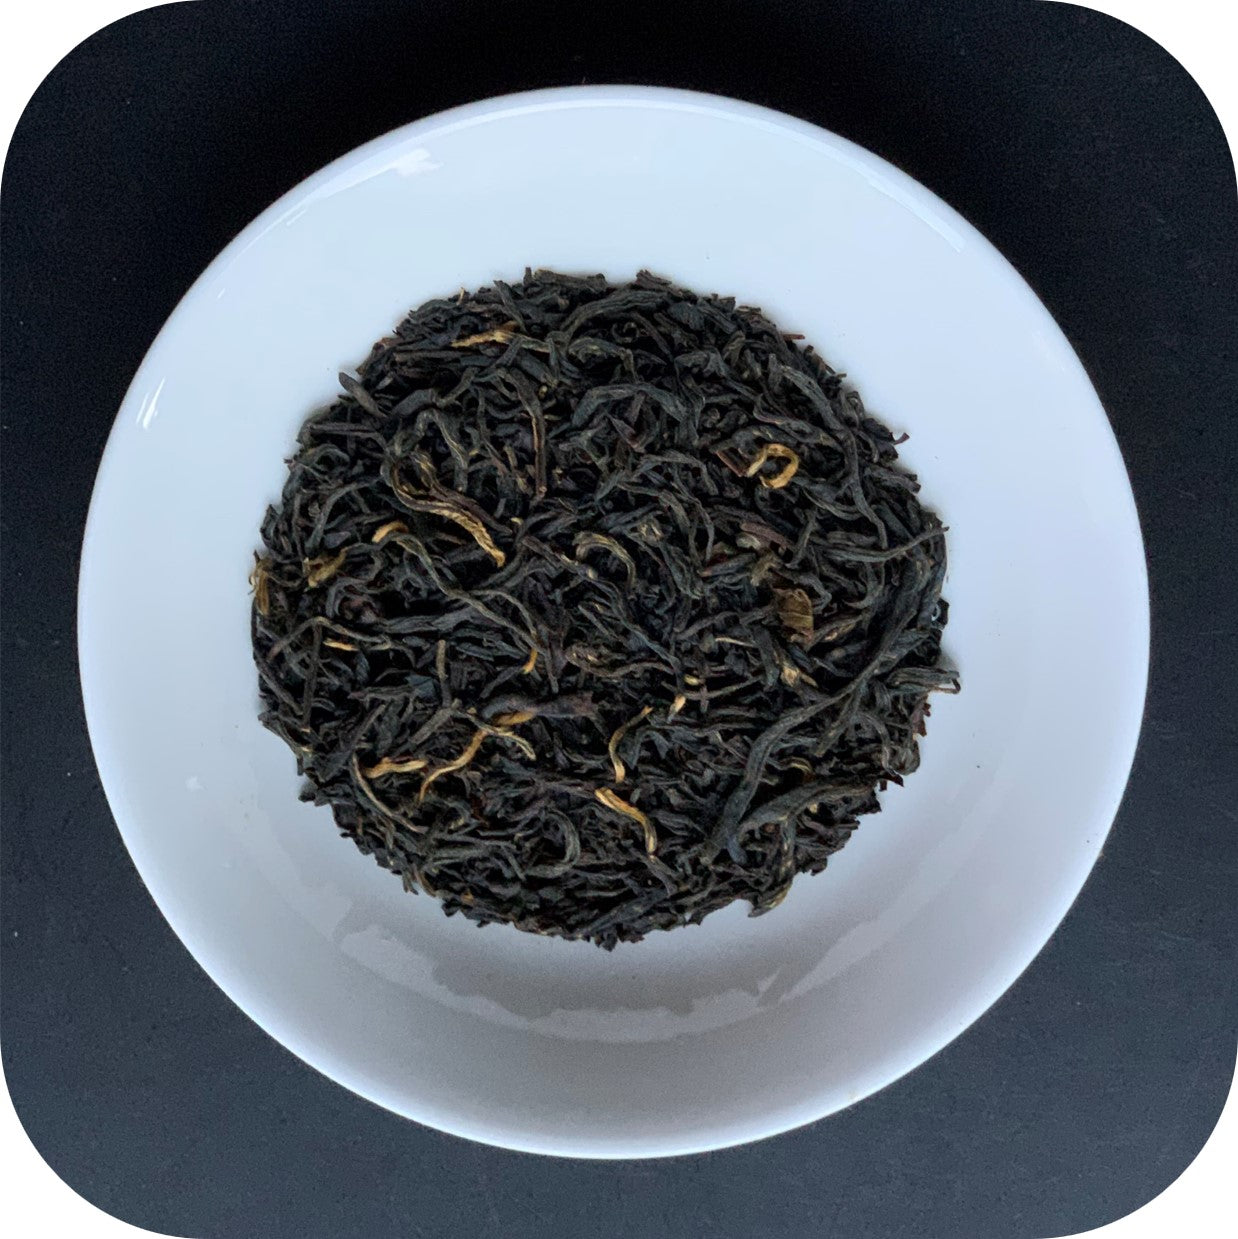 'With A Biscuit' Blend - Black Tea